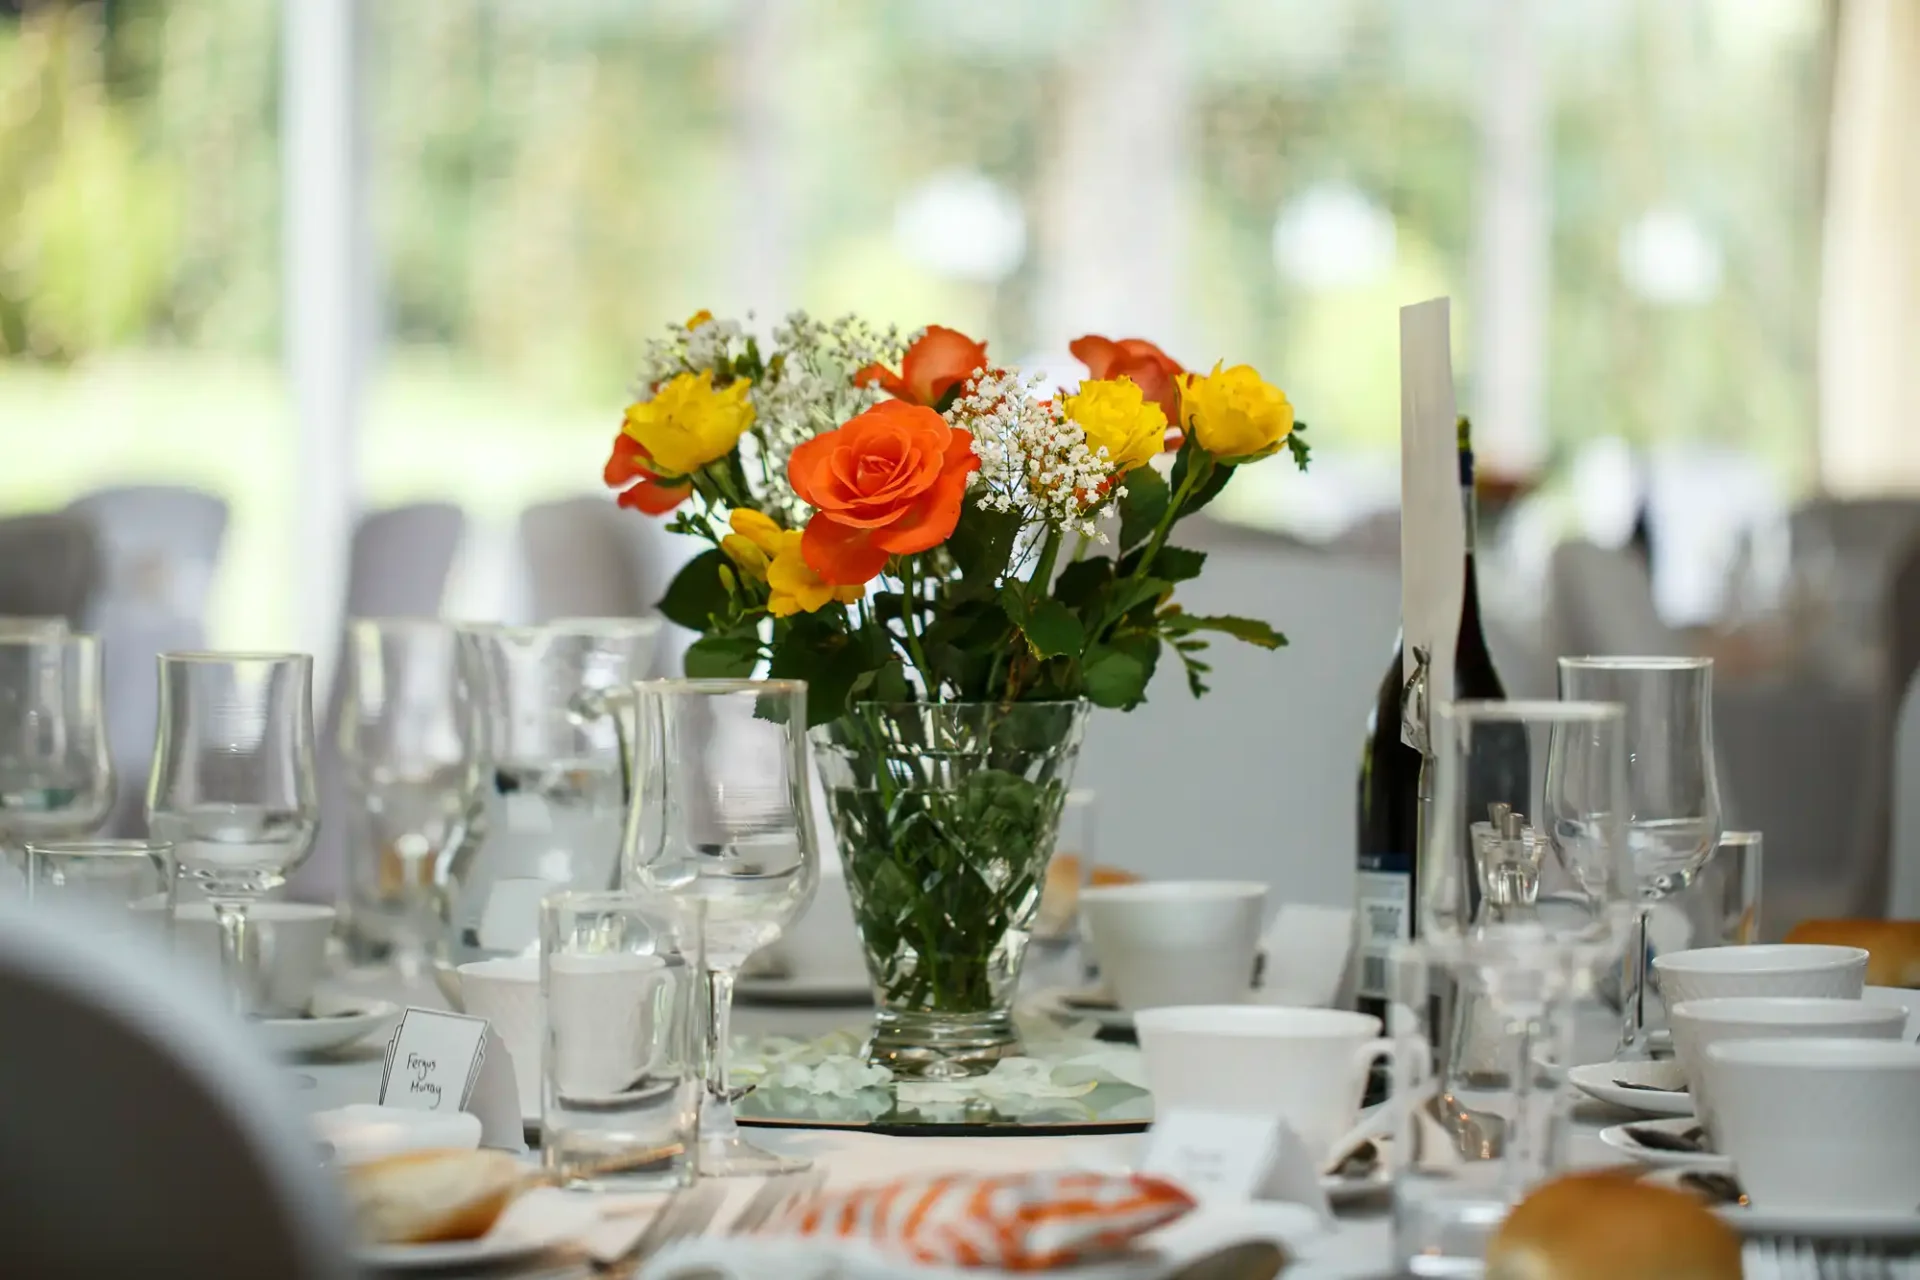 A table set for an event with a vase of yellow and orange flowers surrounded by glasses, plates, and cutlery.